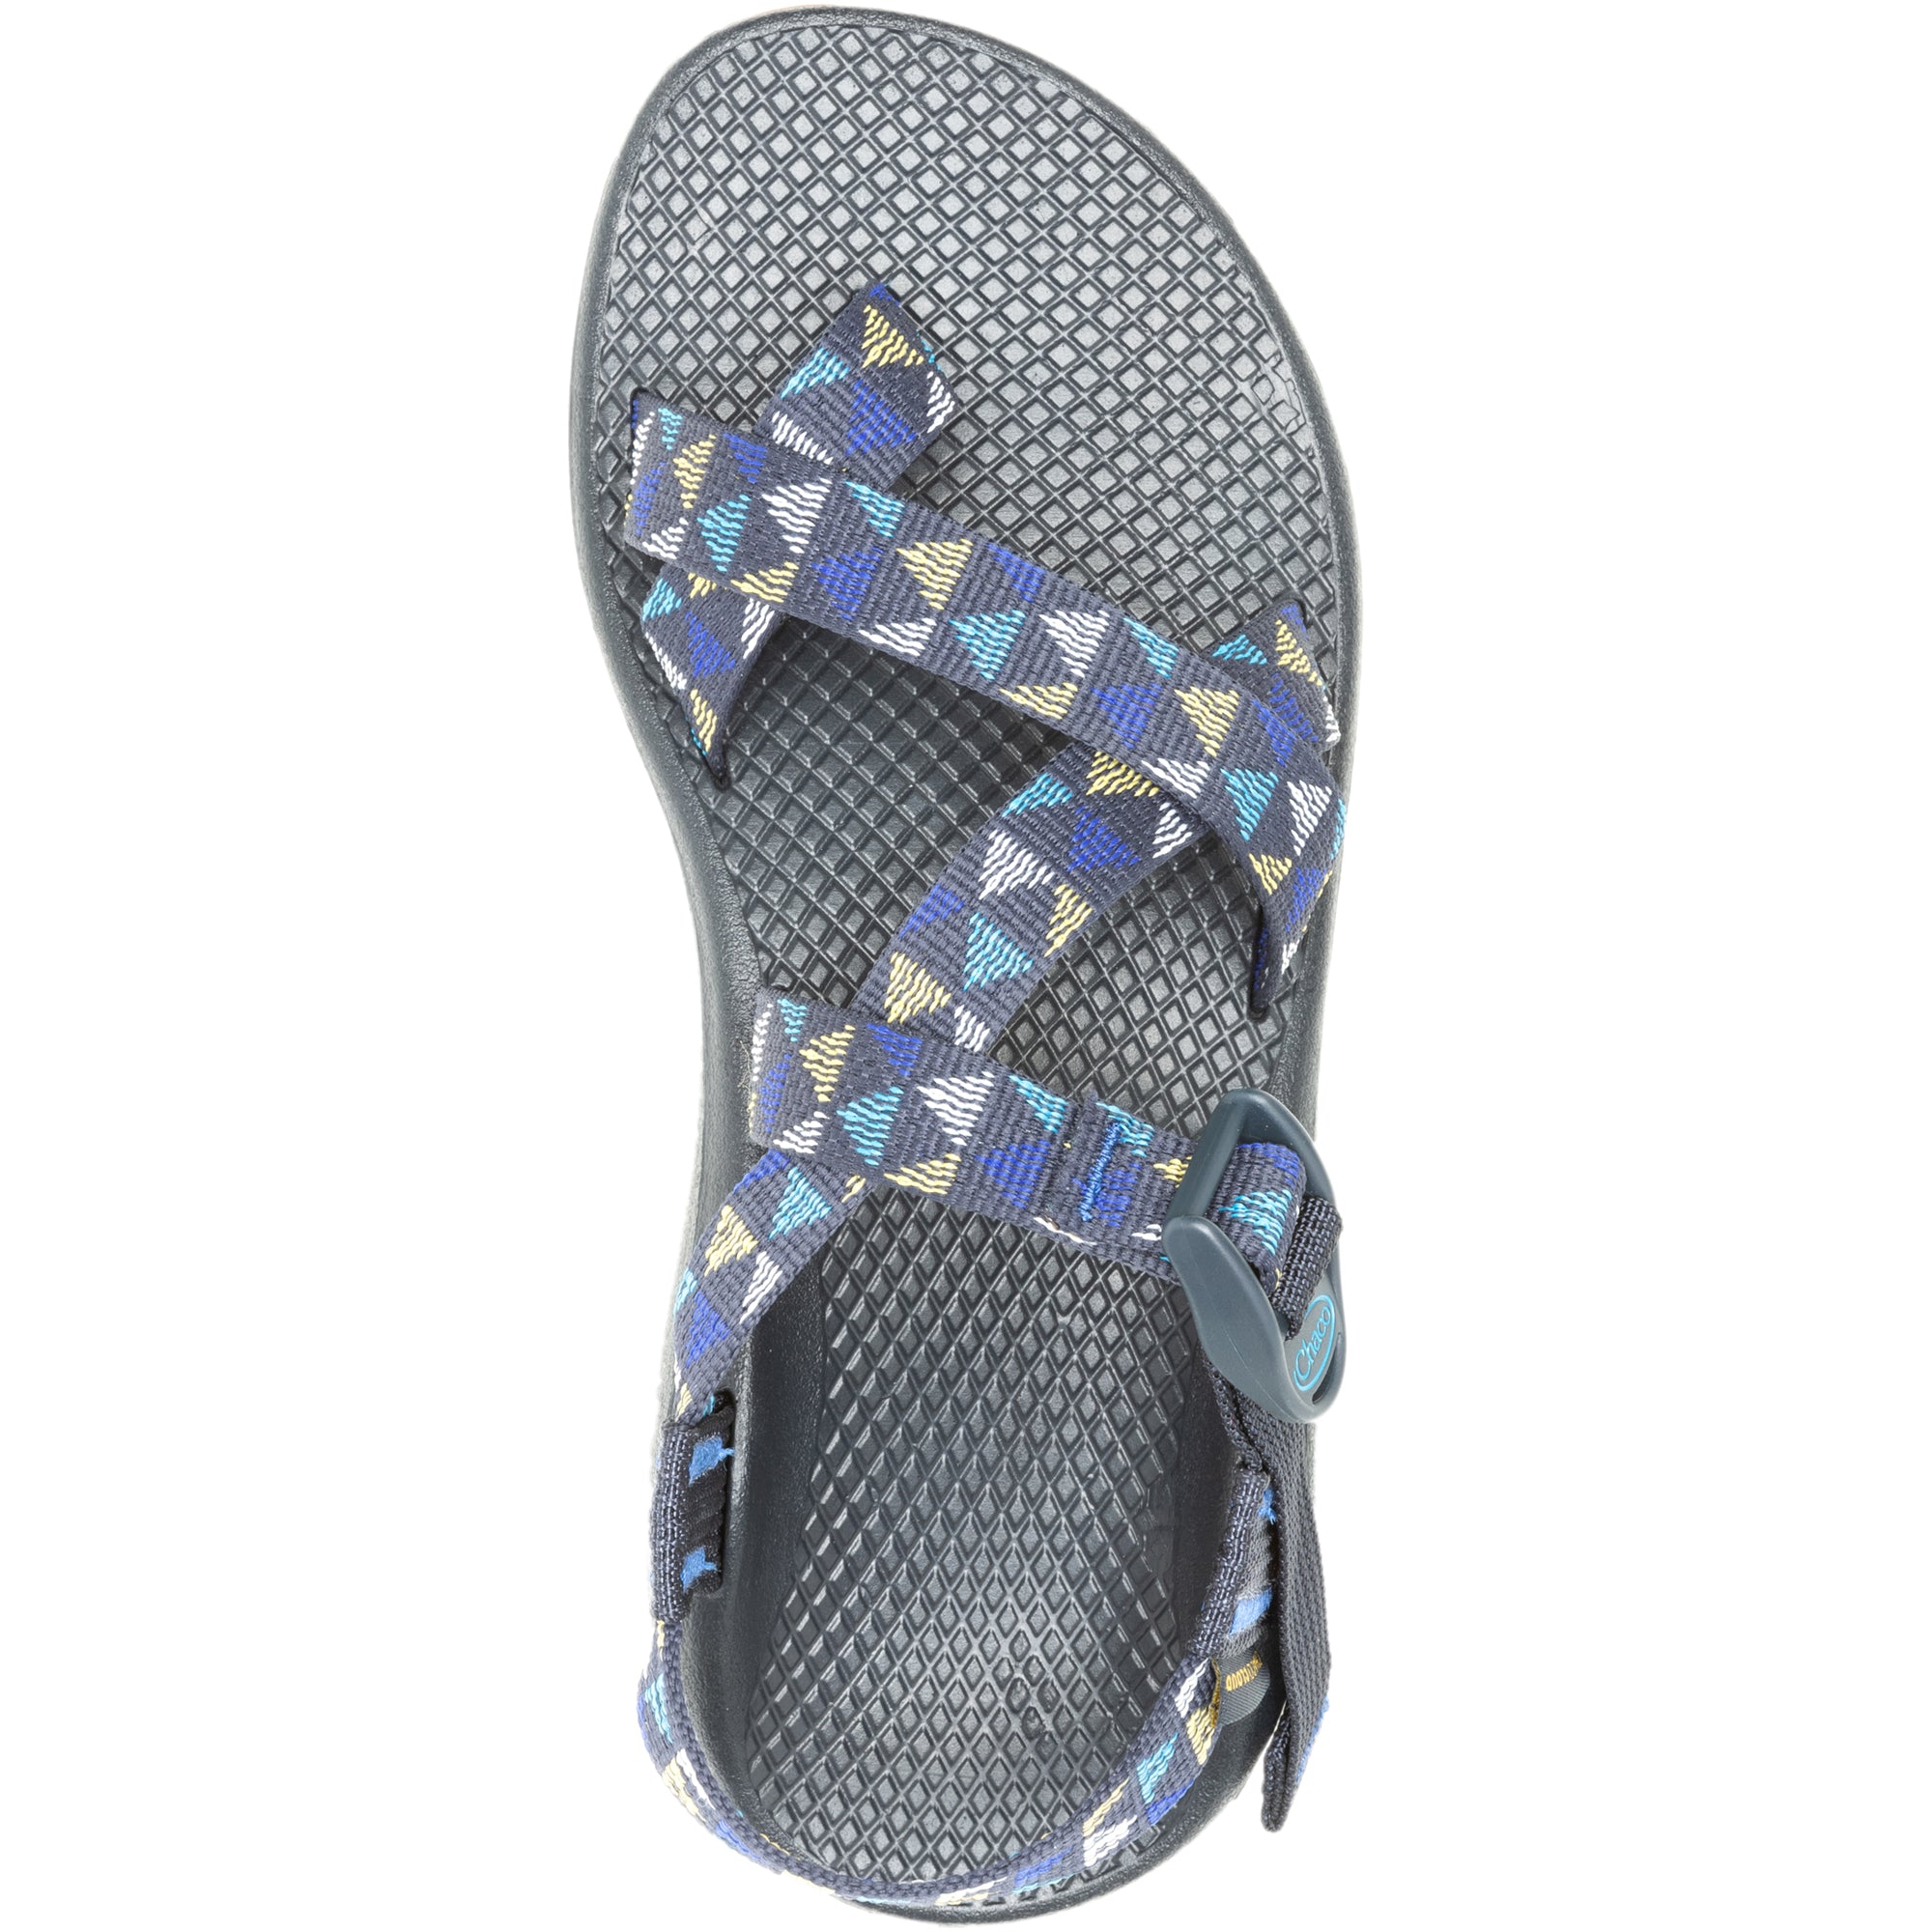 Chaco Women's Z/Cloud X – Elkmont Trading Company